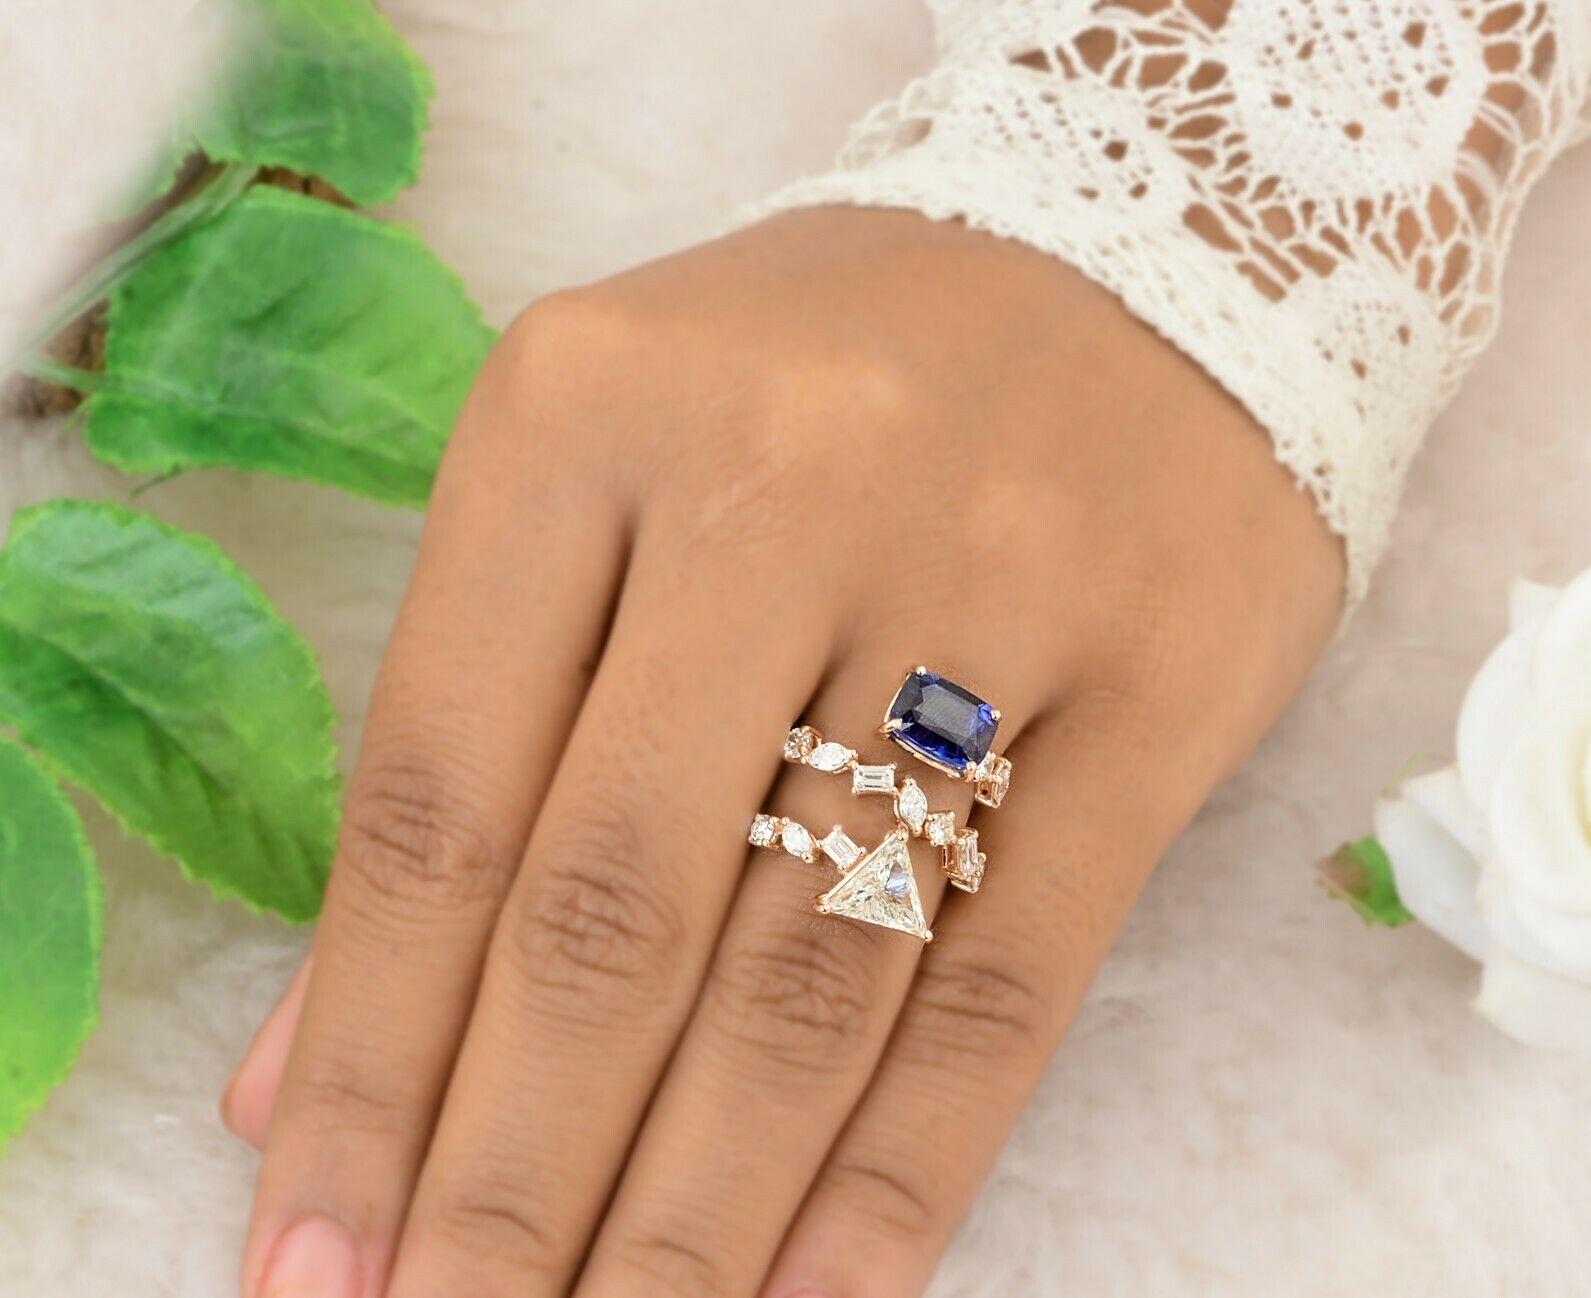 This ring has been meticulously crafted from 14-karat gold.  It is hand set with 3.39 carat blue sapphire & 2.15 carats of sparkling diamonds. 

The ring is a size 7 and may be resized to larger or smaller upon request. 
FOLLOW  MEGHNA JEWELS